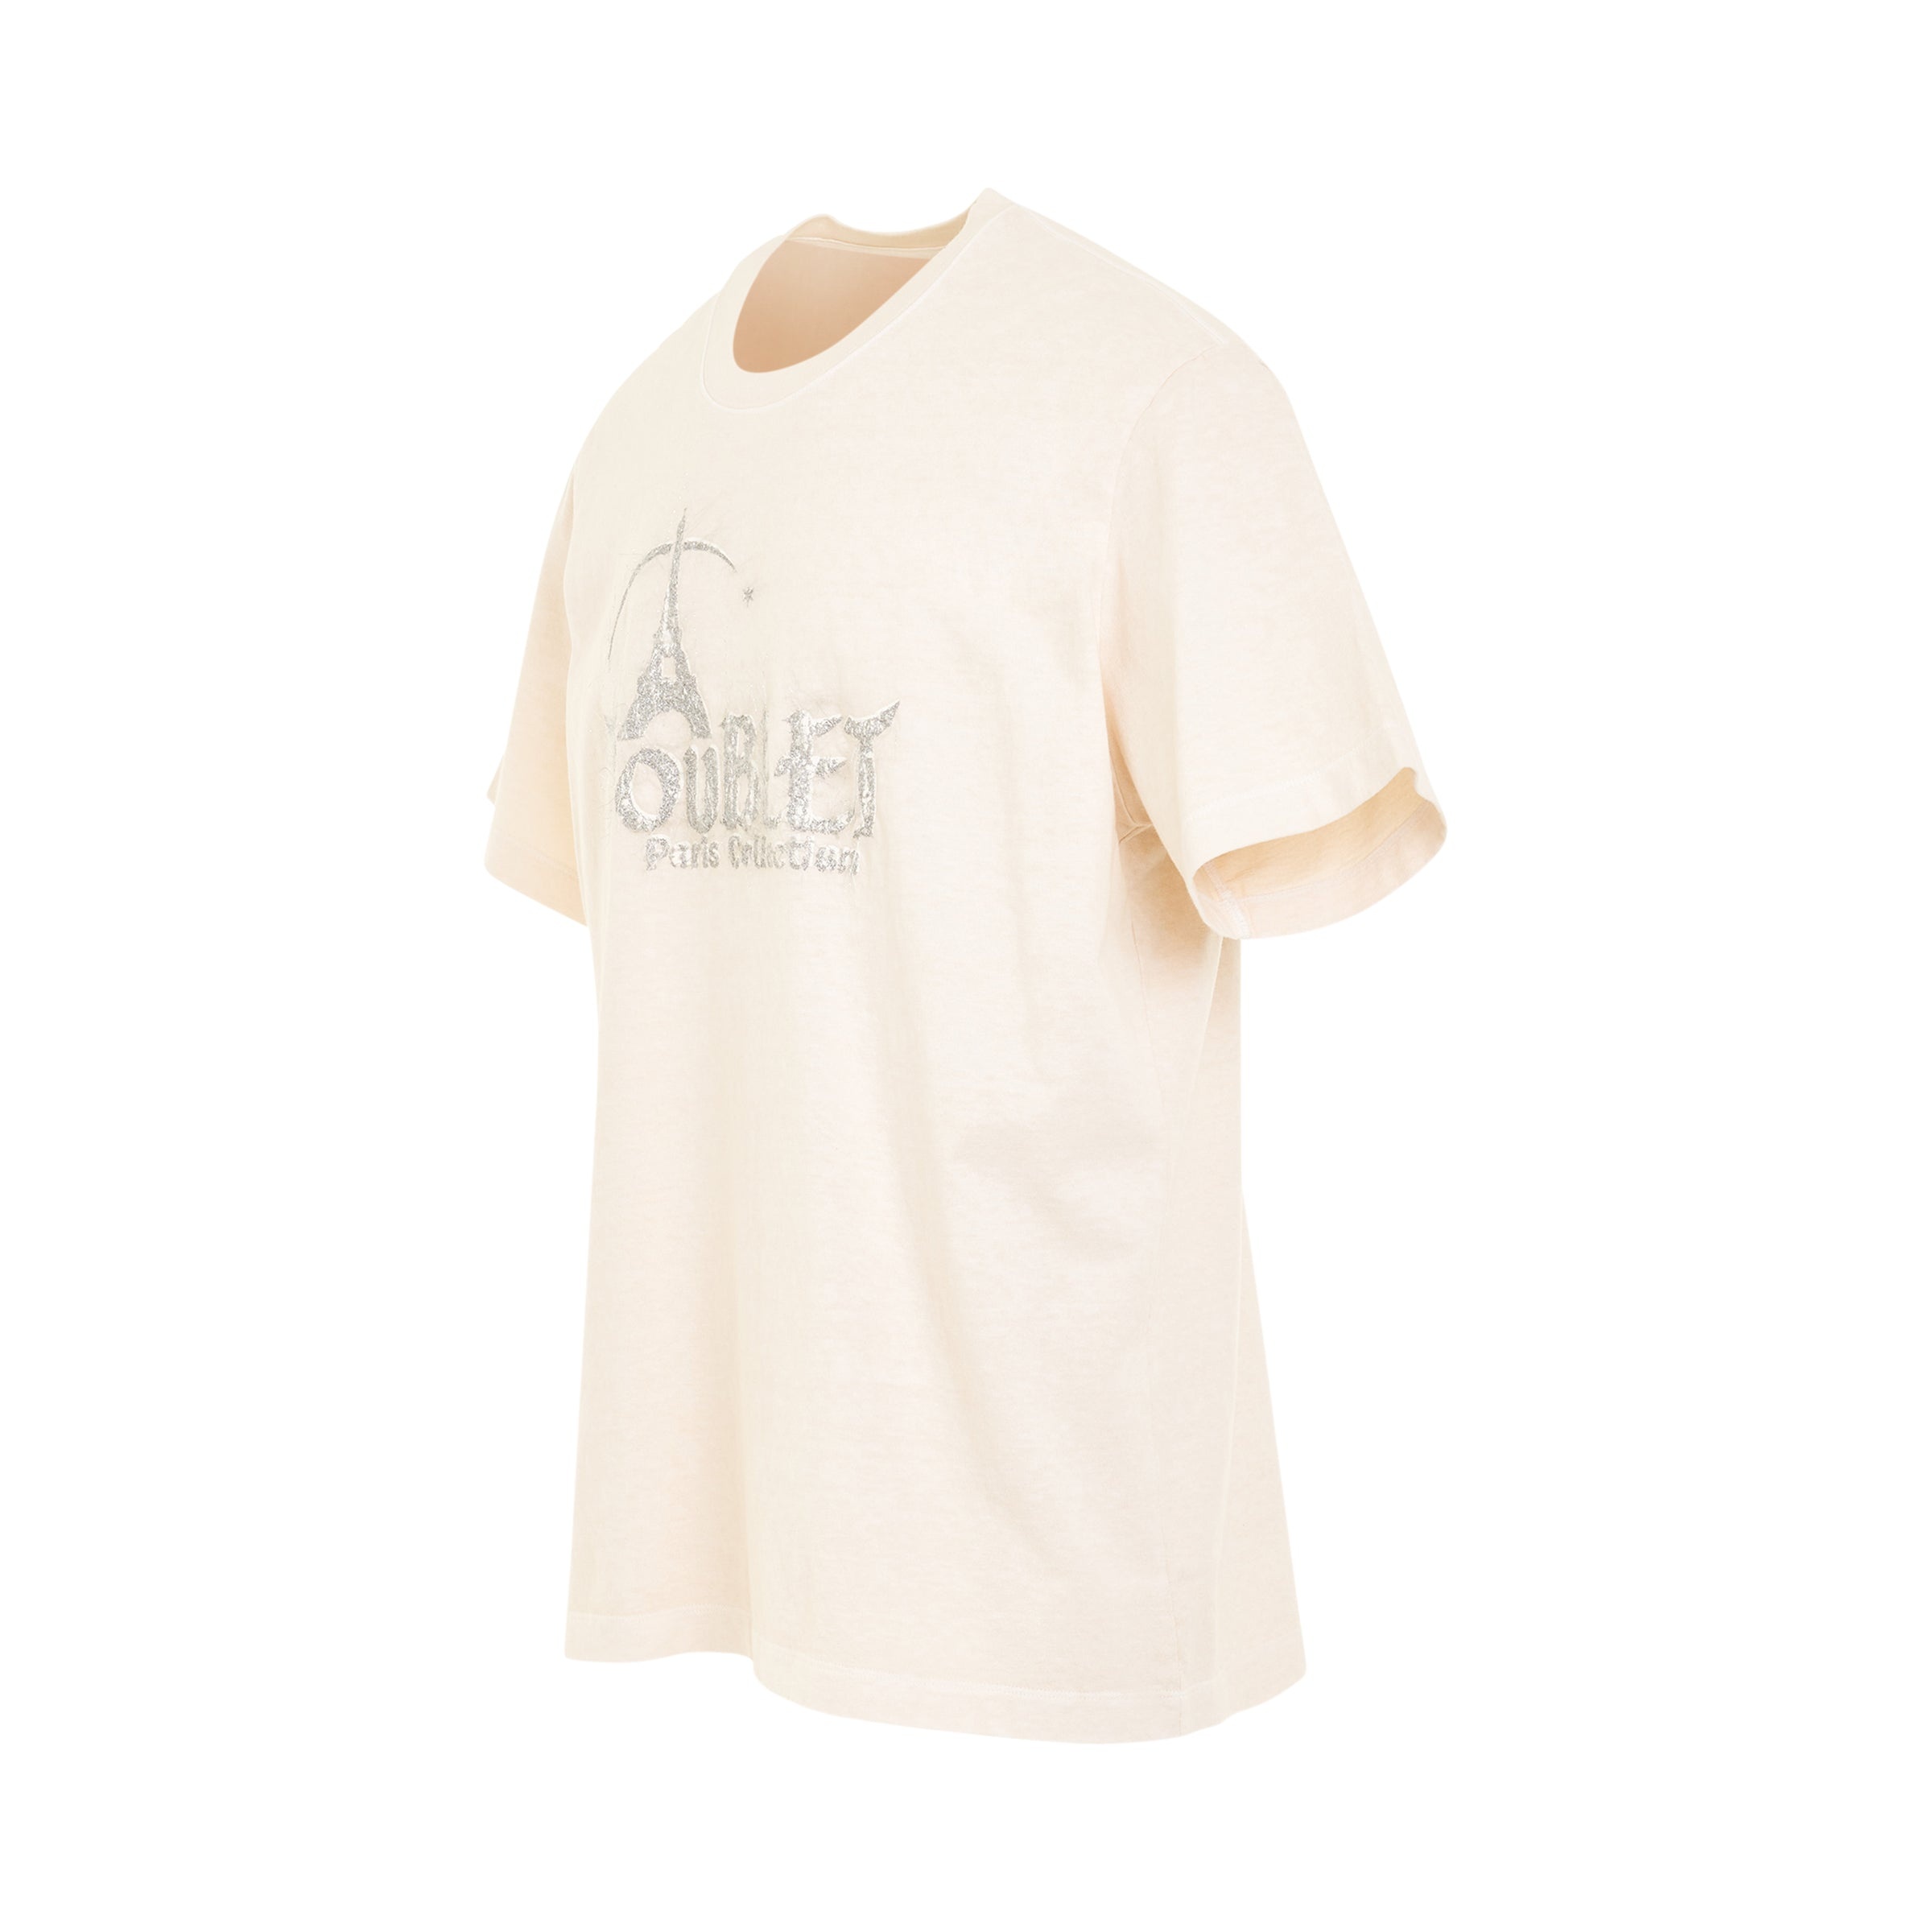 "DOUBLAND" Embroidery T-Shirt in White - 2